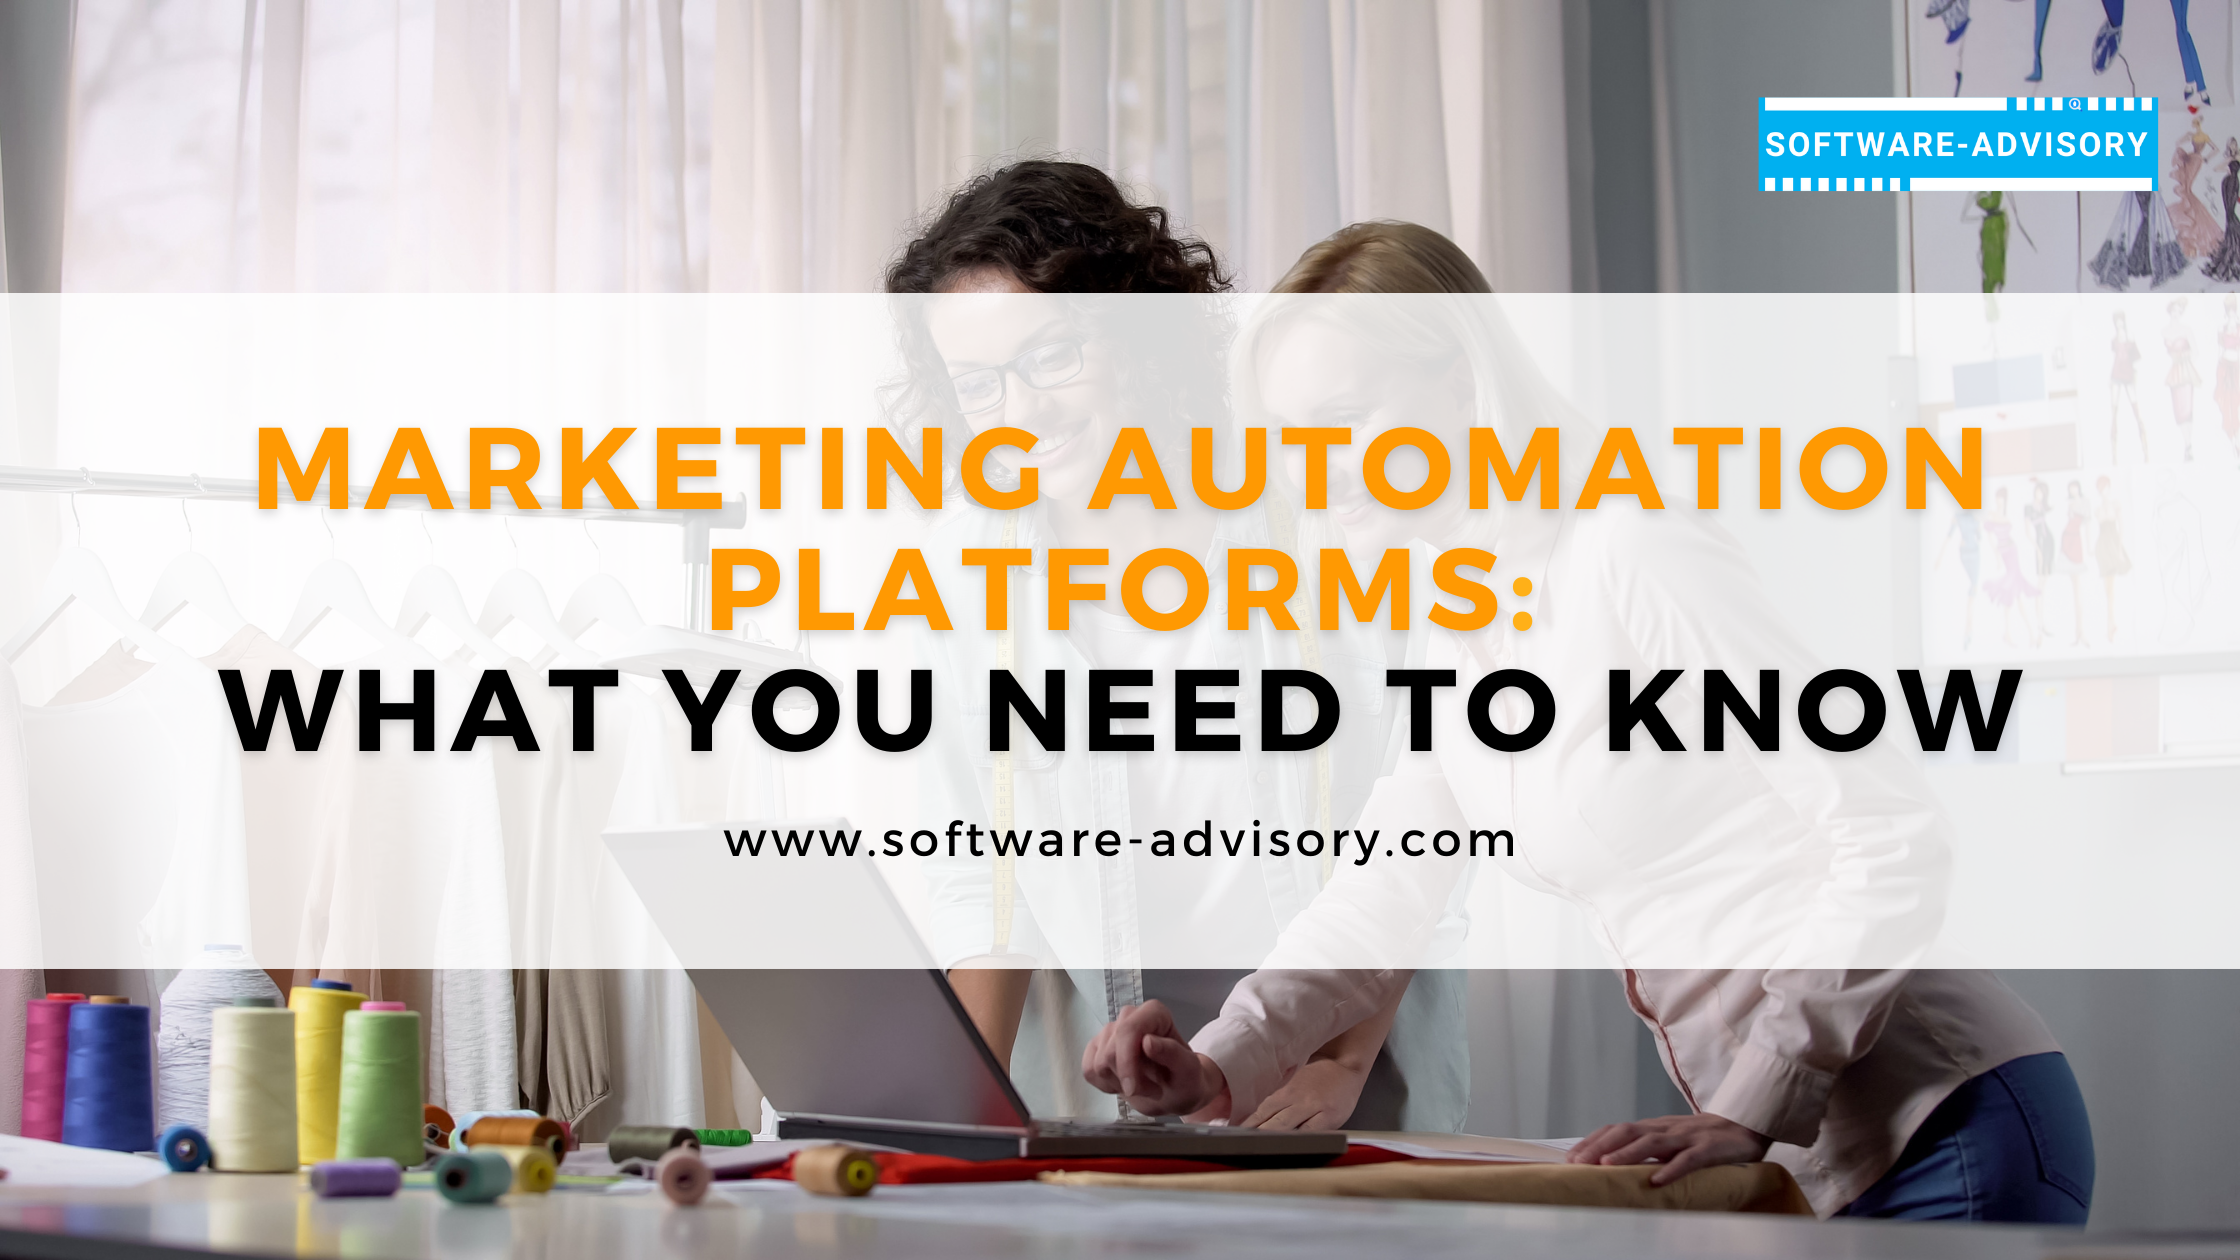 Marketing Automation Platforms: What You Need to Know